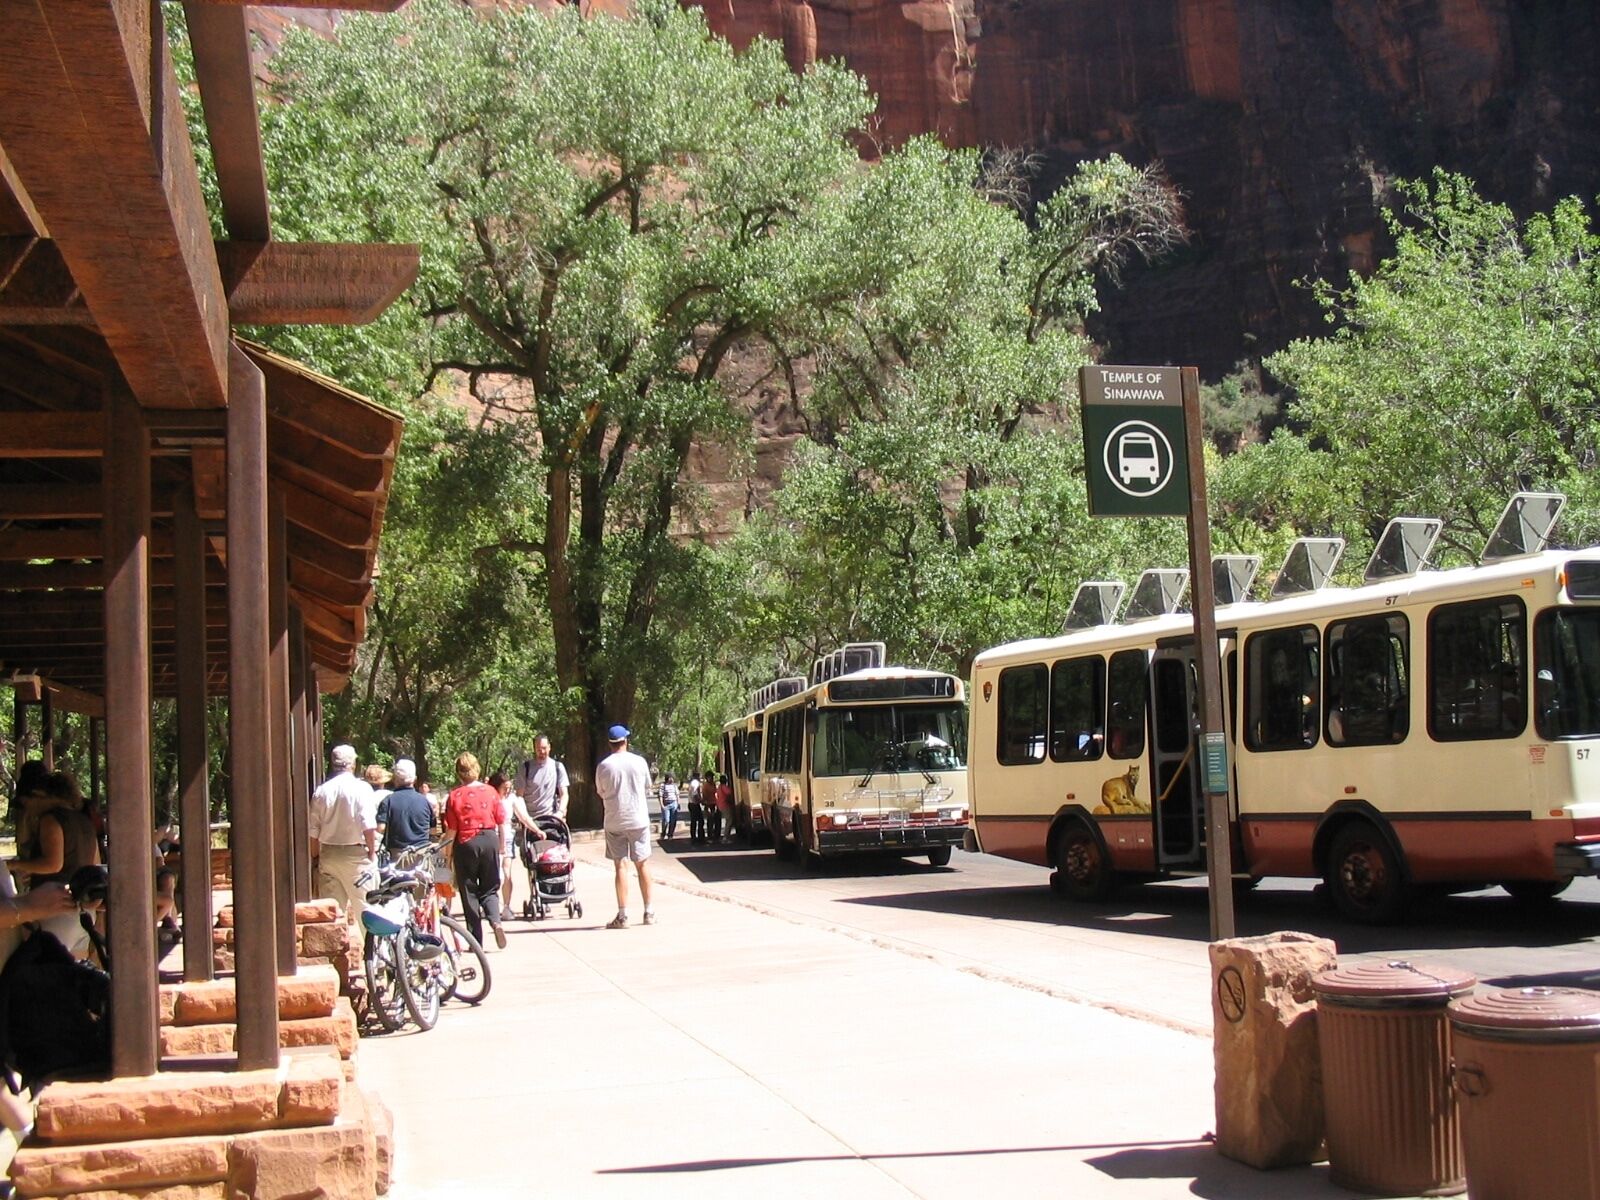 zion national park shuttle - last stop on the map